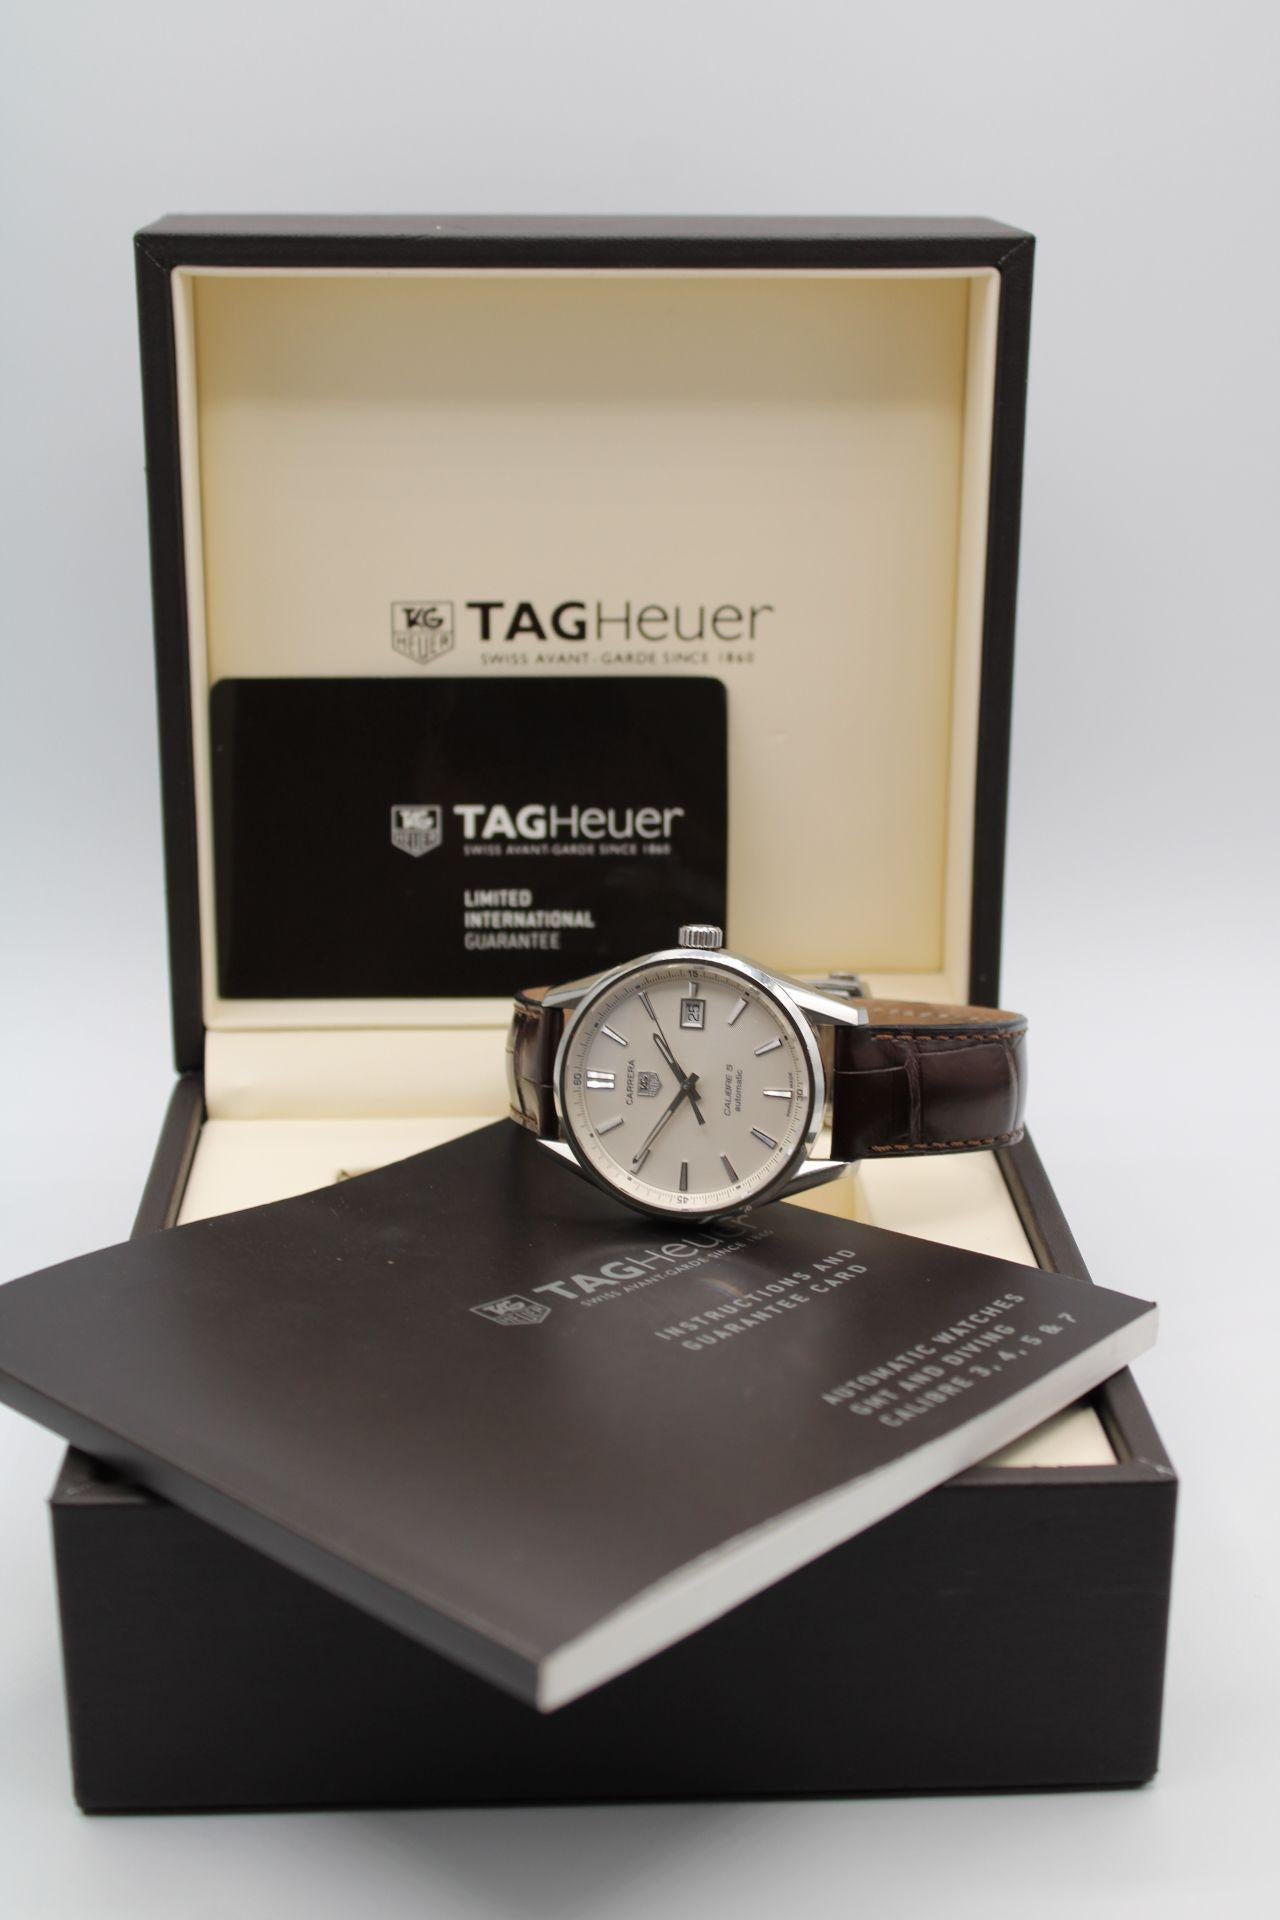 We are delighted to be able to offer this fantastic Tag Heuer Carrera 5 accompanied with its original box, manual and warranty card dated December 2015.

This Tag Heuer, model WAR211B-3, features a stainless steel case measuring 39mm, domed polished